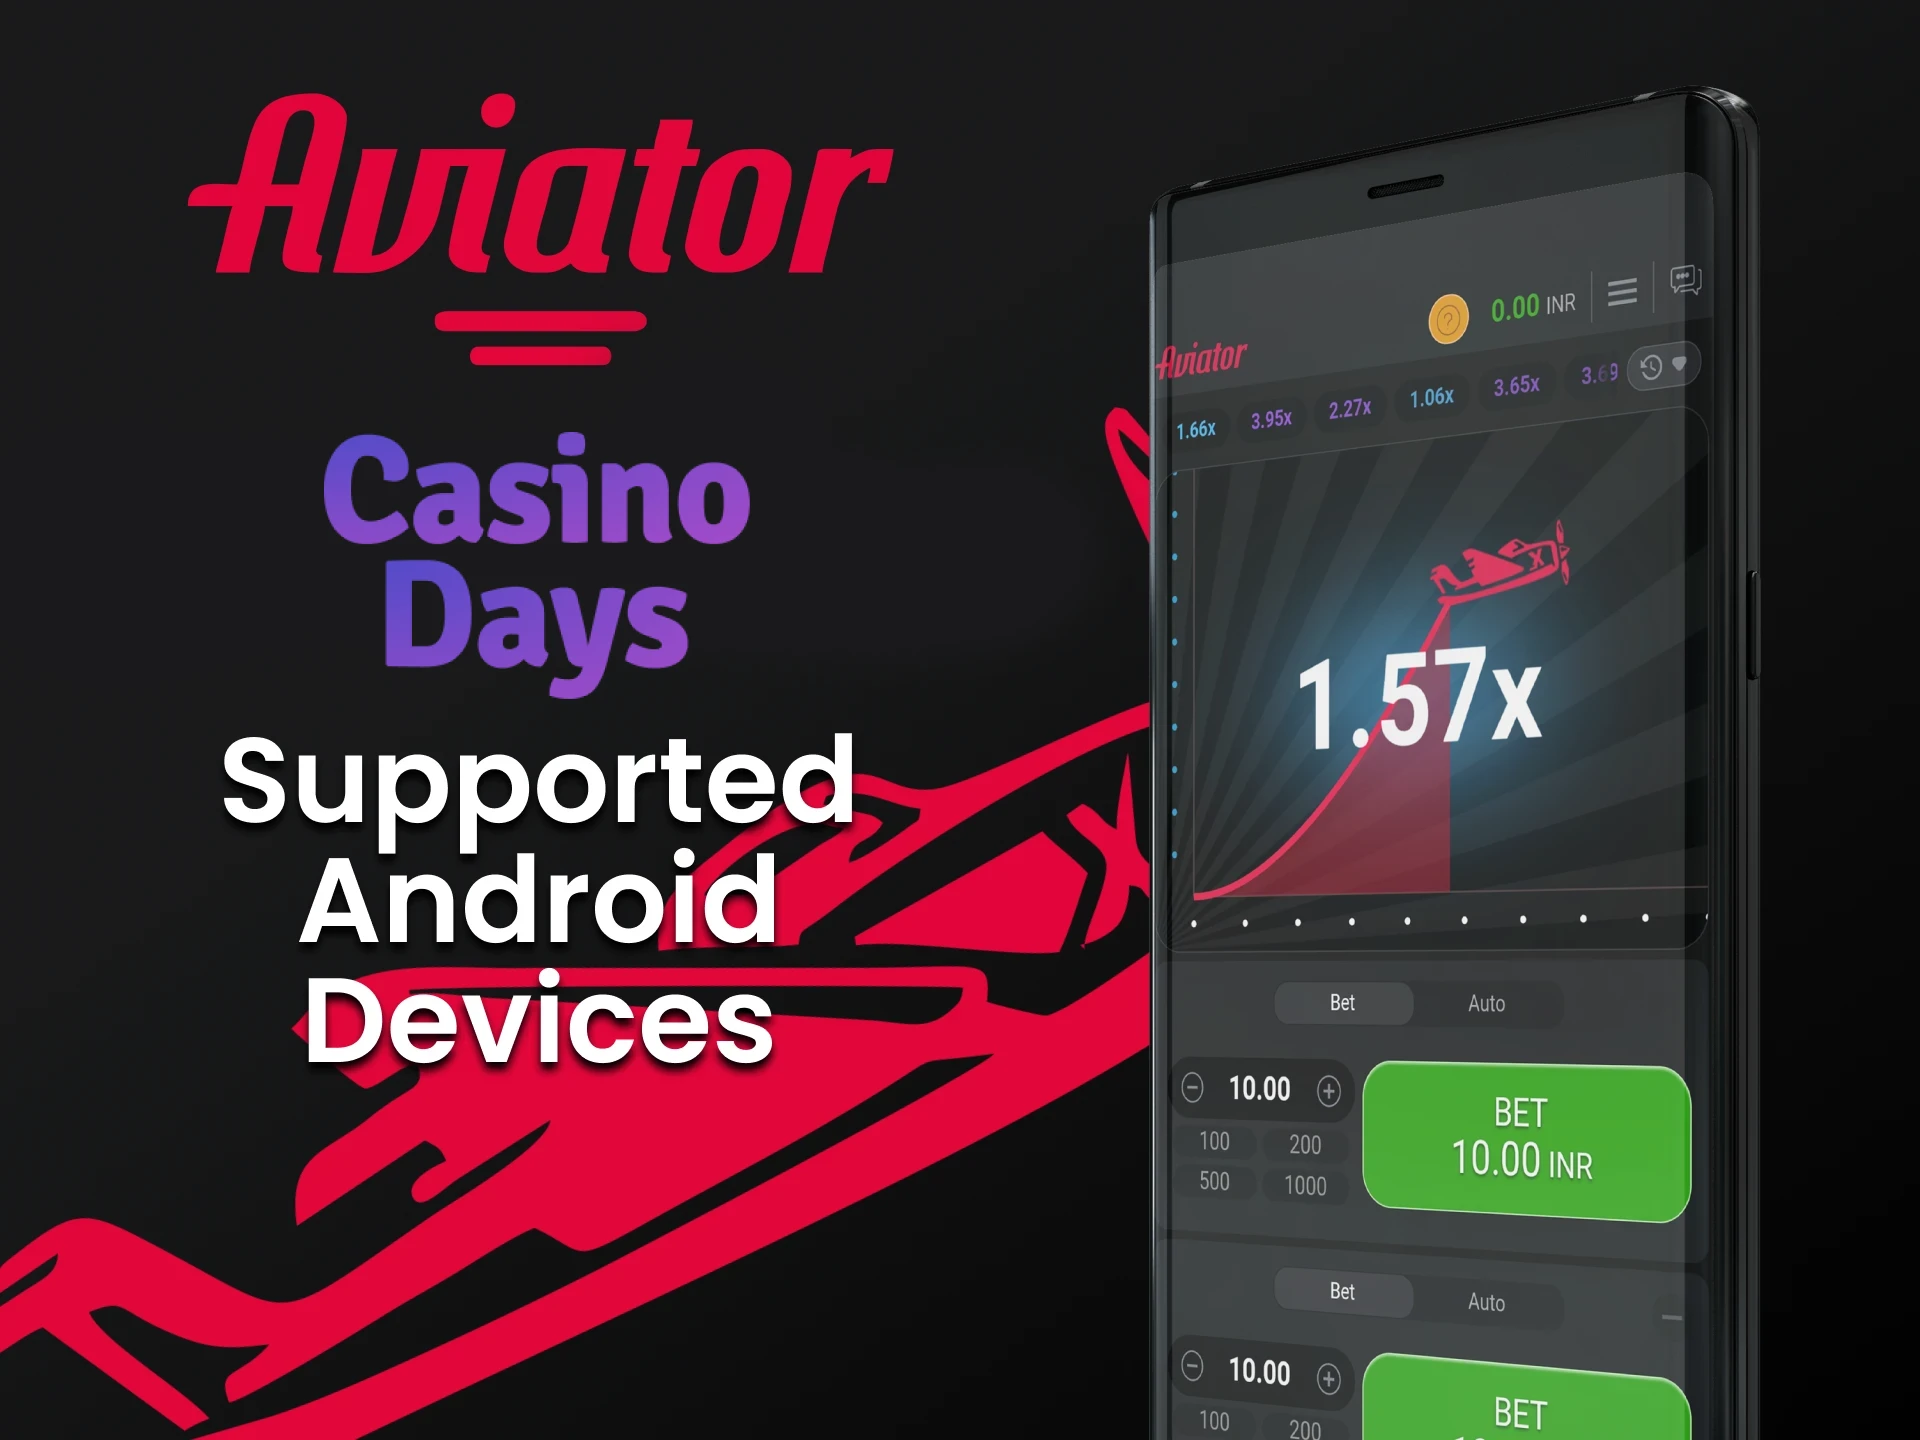 To play Aviator, use the Casino Days application on Android.